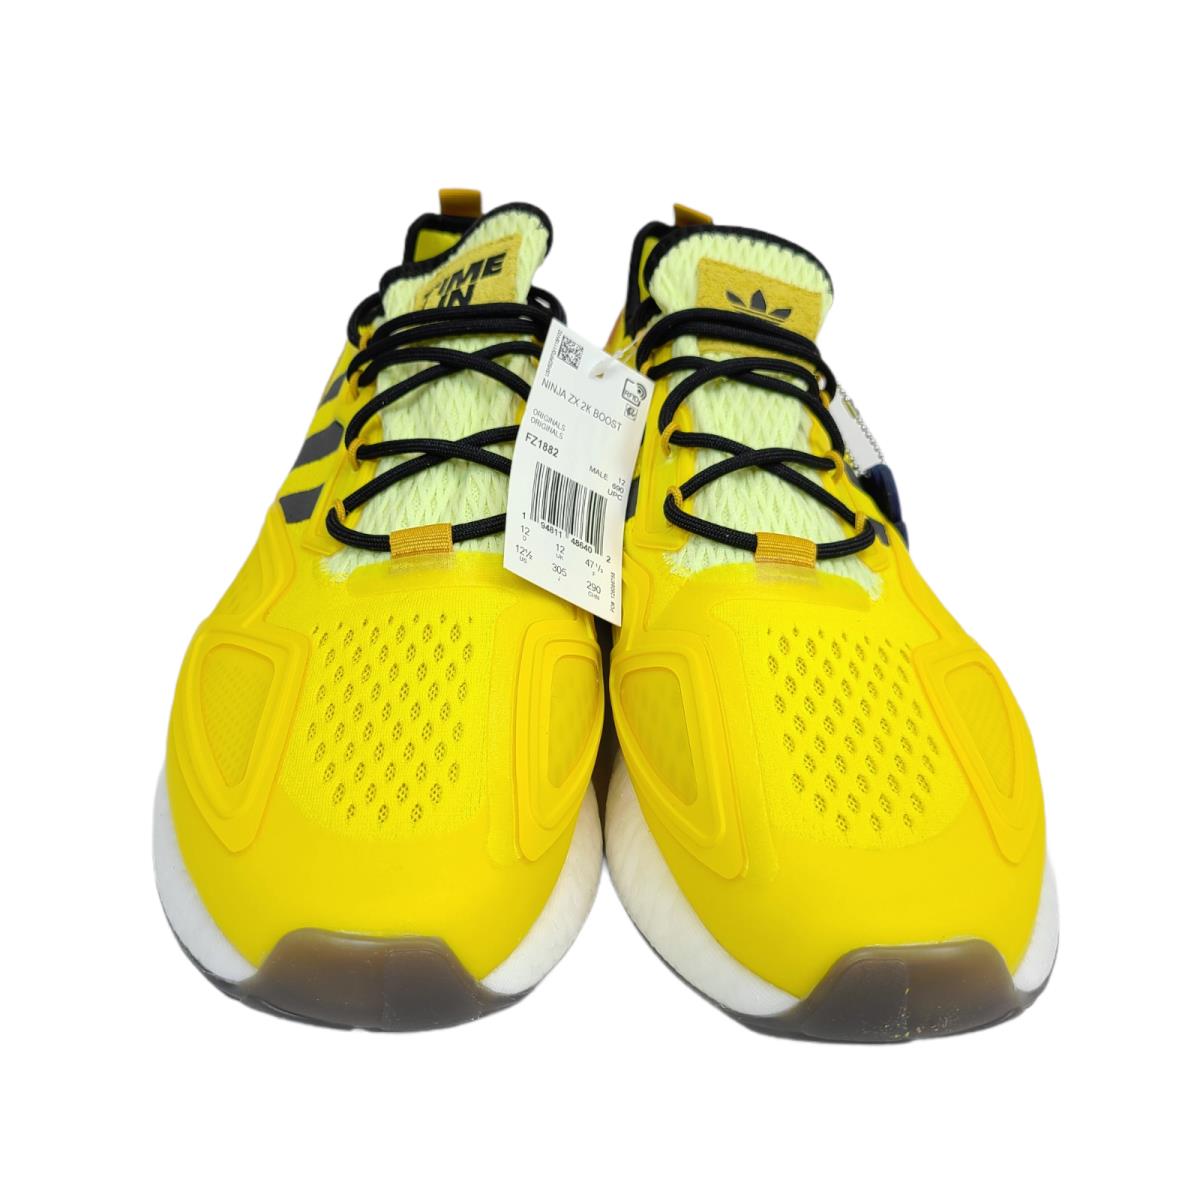 Adidas shoes Boost - Yellow 9